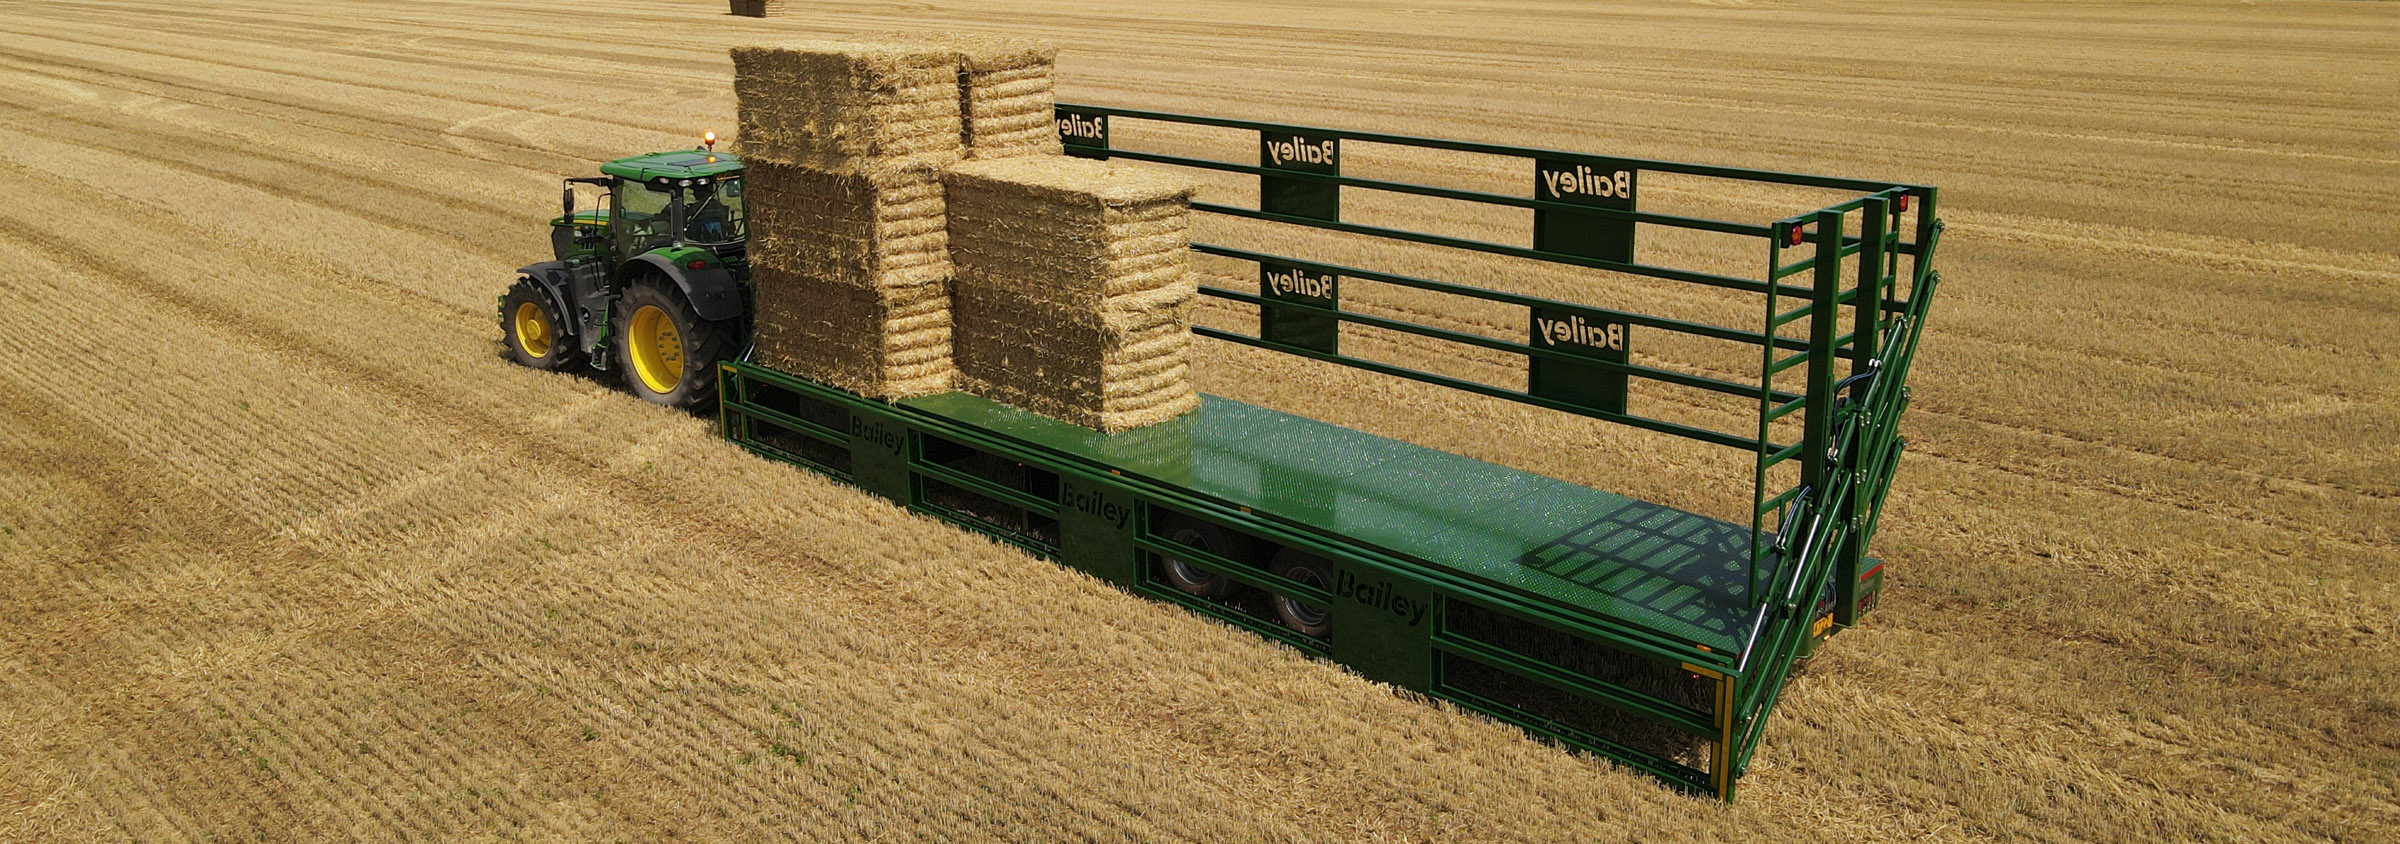 Bale and Pallet Trailers